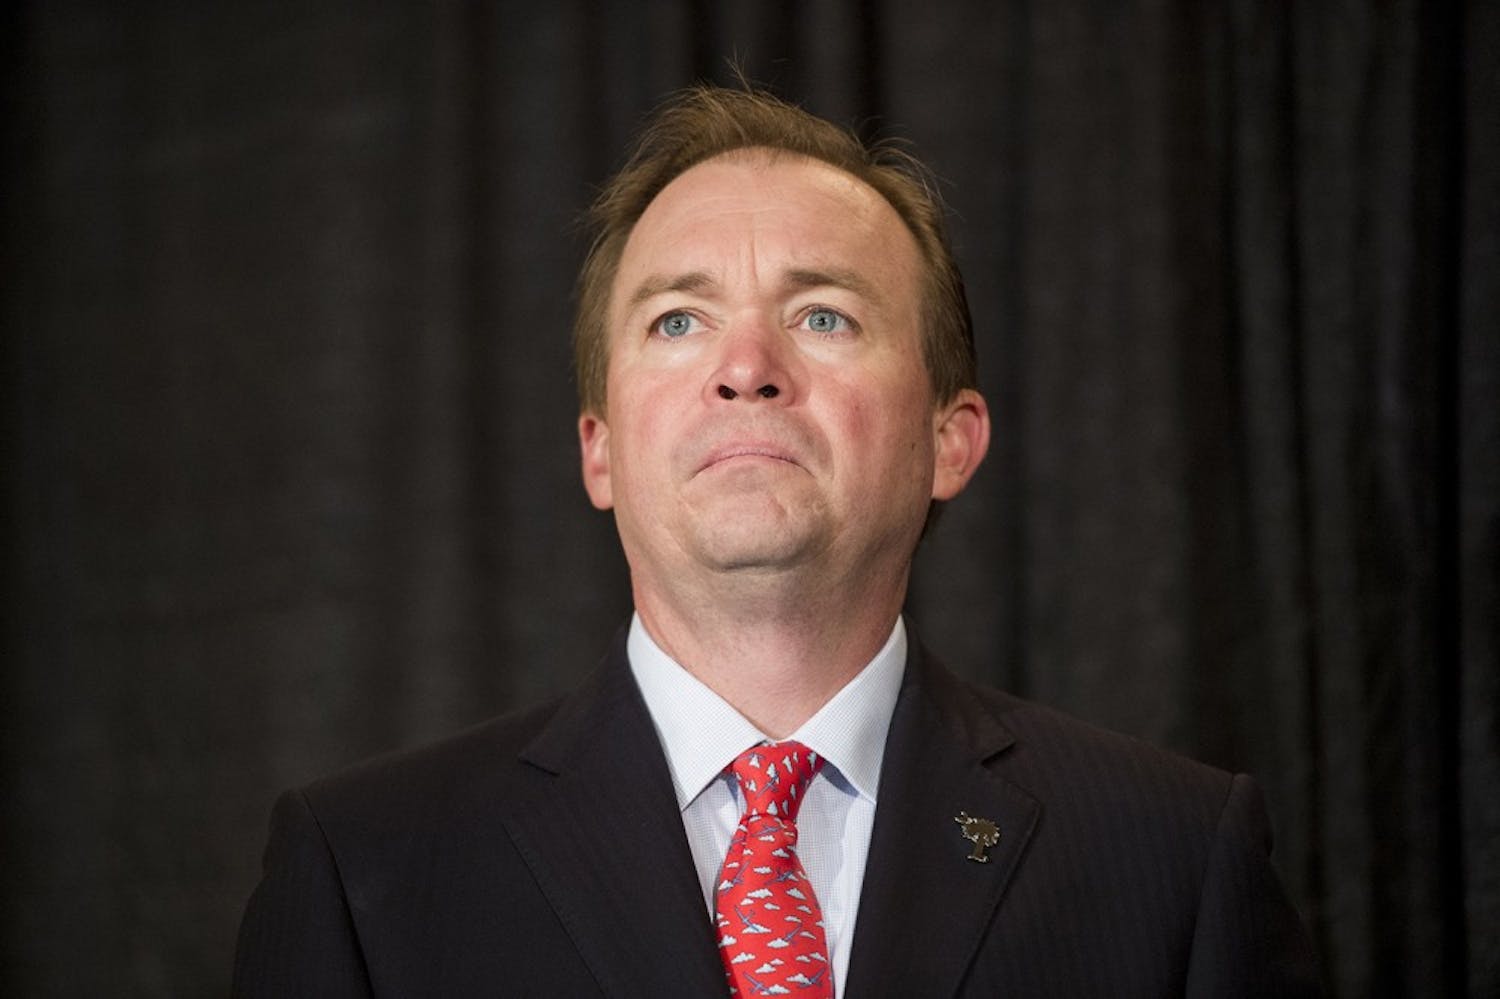 Rep. Mick Mulvaney, R-S.C., participates in the Citizens Against Government Waste press conference to release the 2016 Congressional Pig Book report on pork spending on Wednesday, April 13, 2016, at the Phoenix Park Hotel in Washington, D.C. (Bill Clark/Congressional Quarterly/Newscom/Zuma Press/TNS)